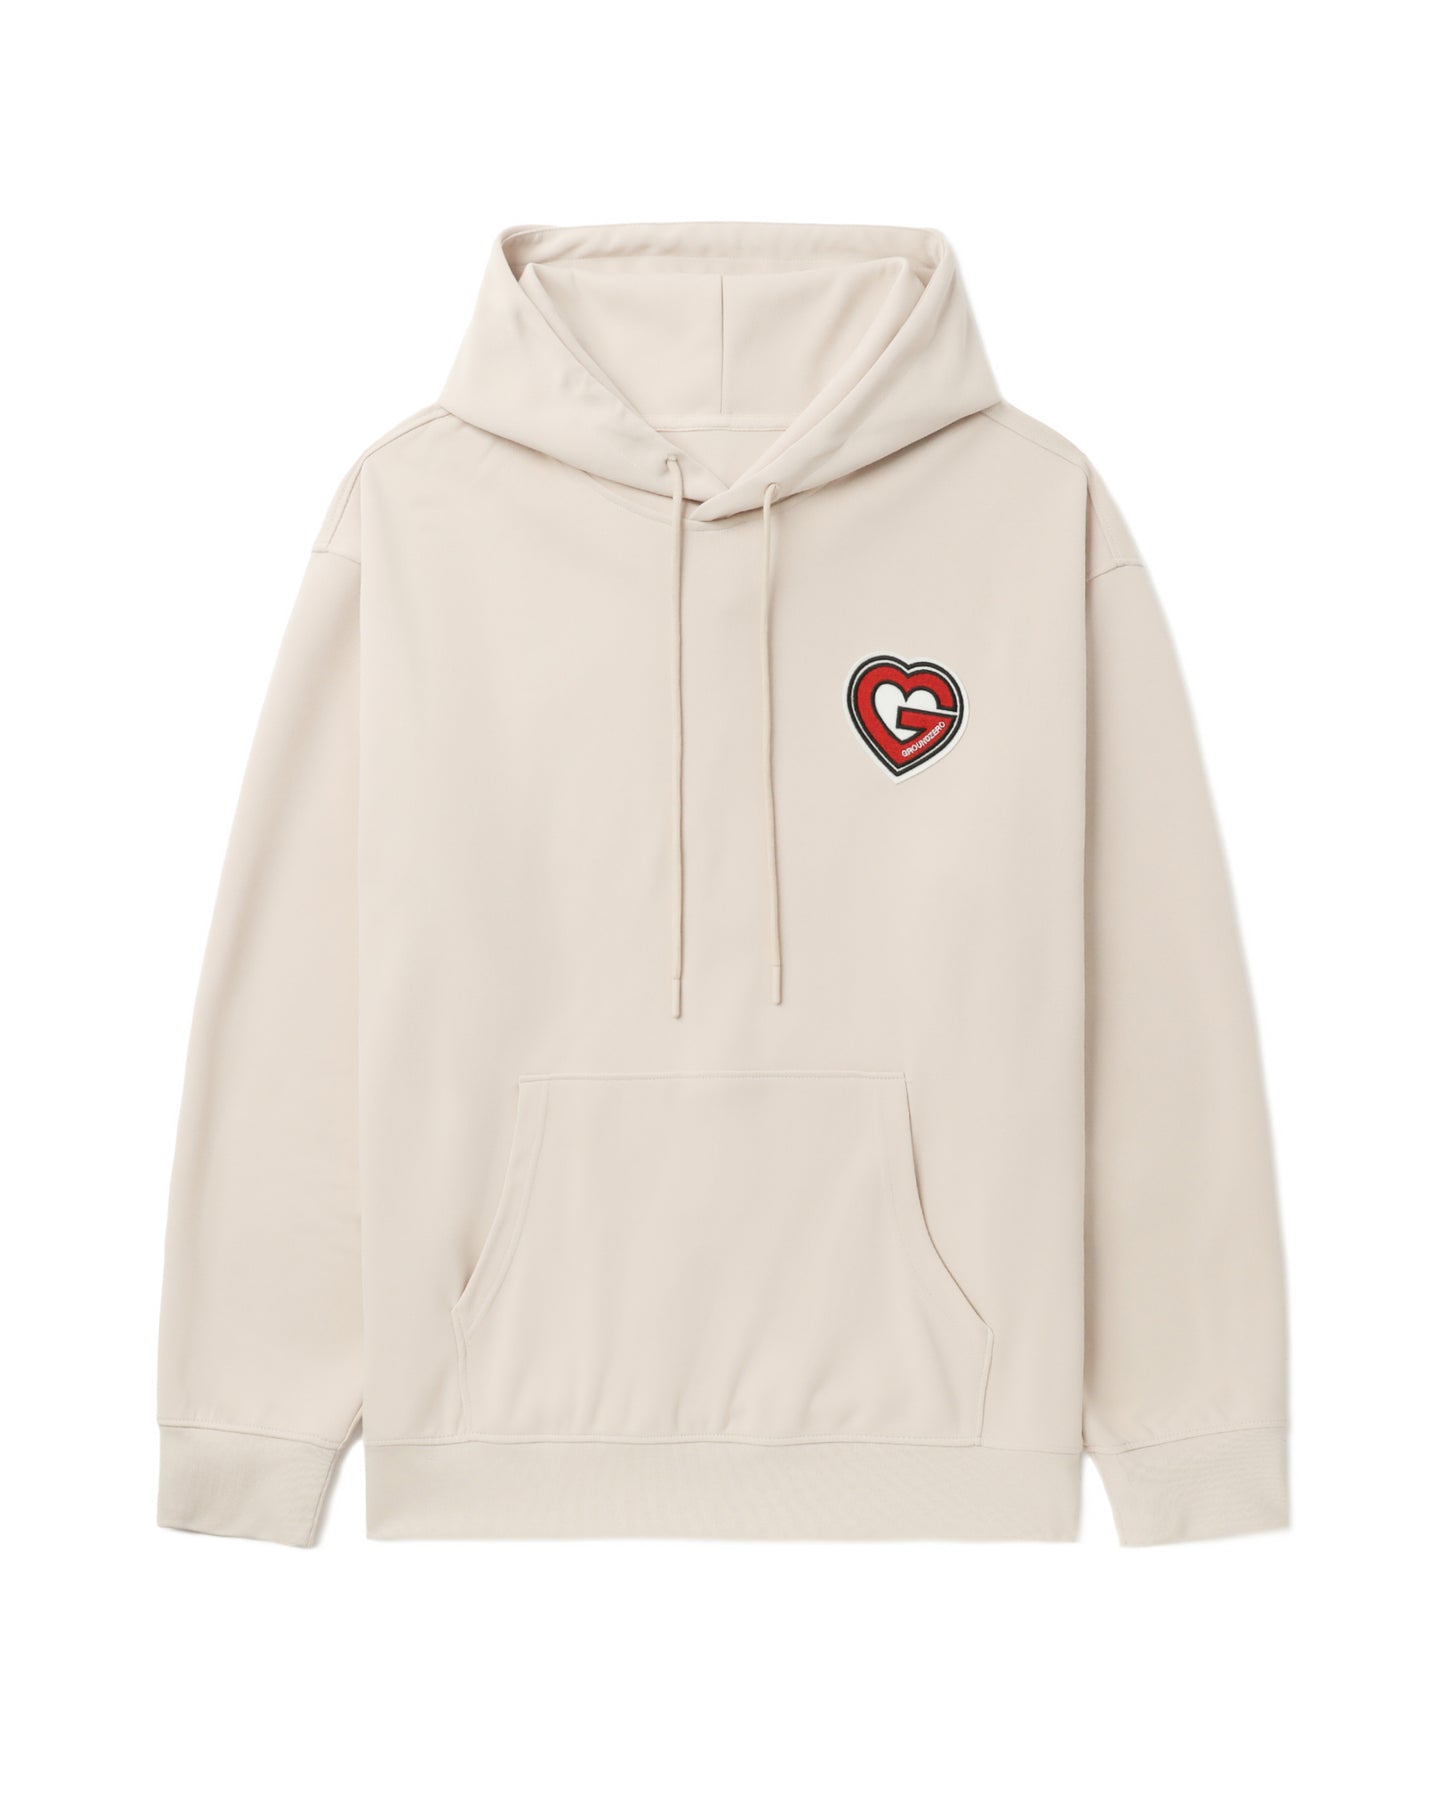 G-heart Patch Hoodie